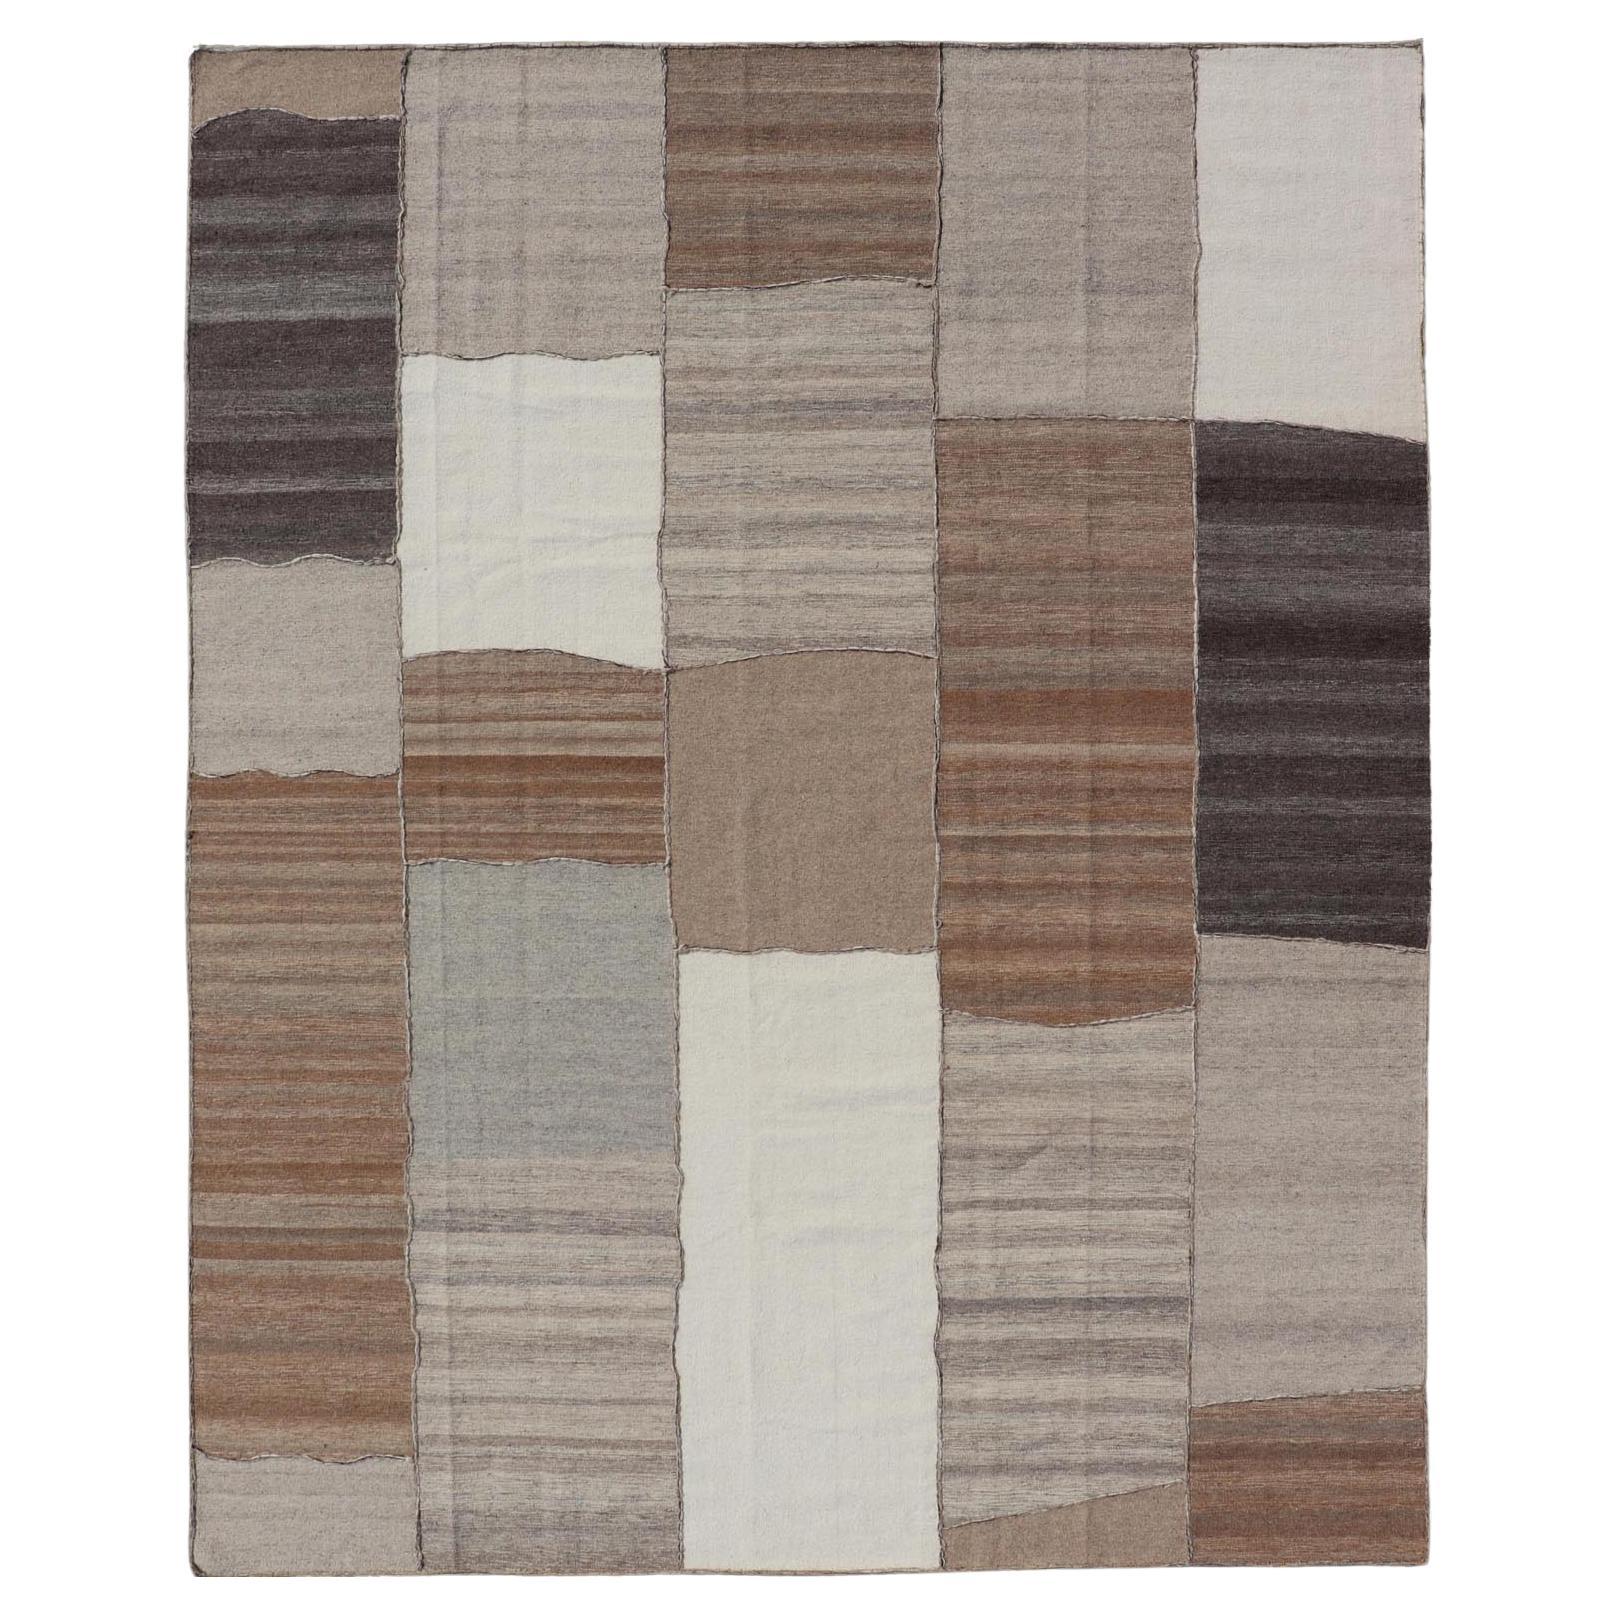 Modern Kilim Rug in Multi-Panel Striped Design with Brown, Gray, White and Taupe For Sale